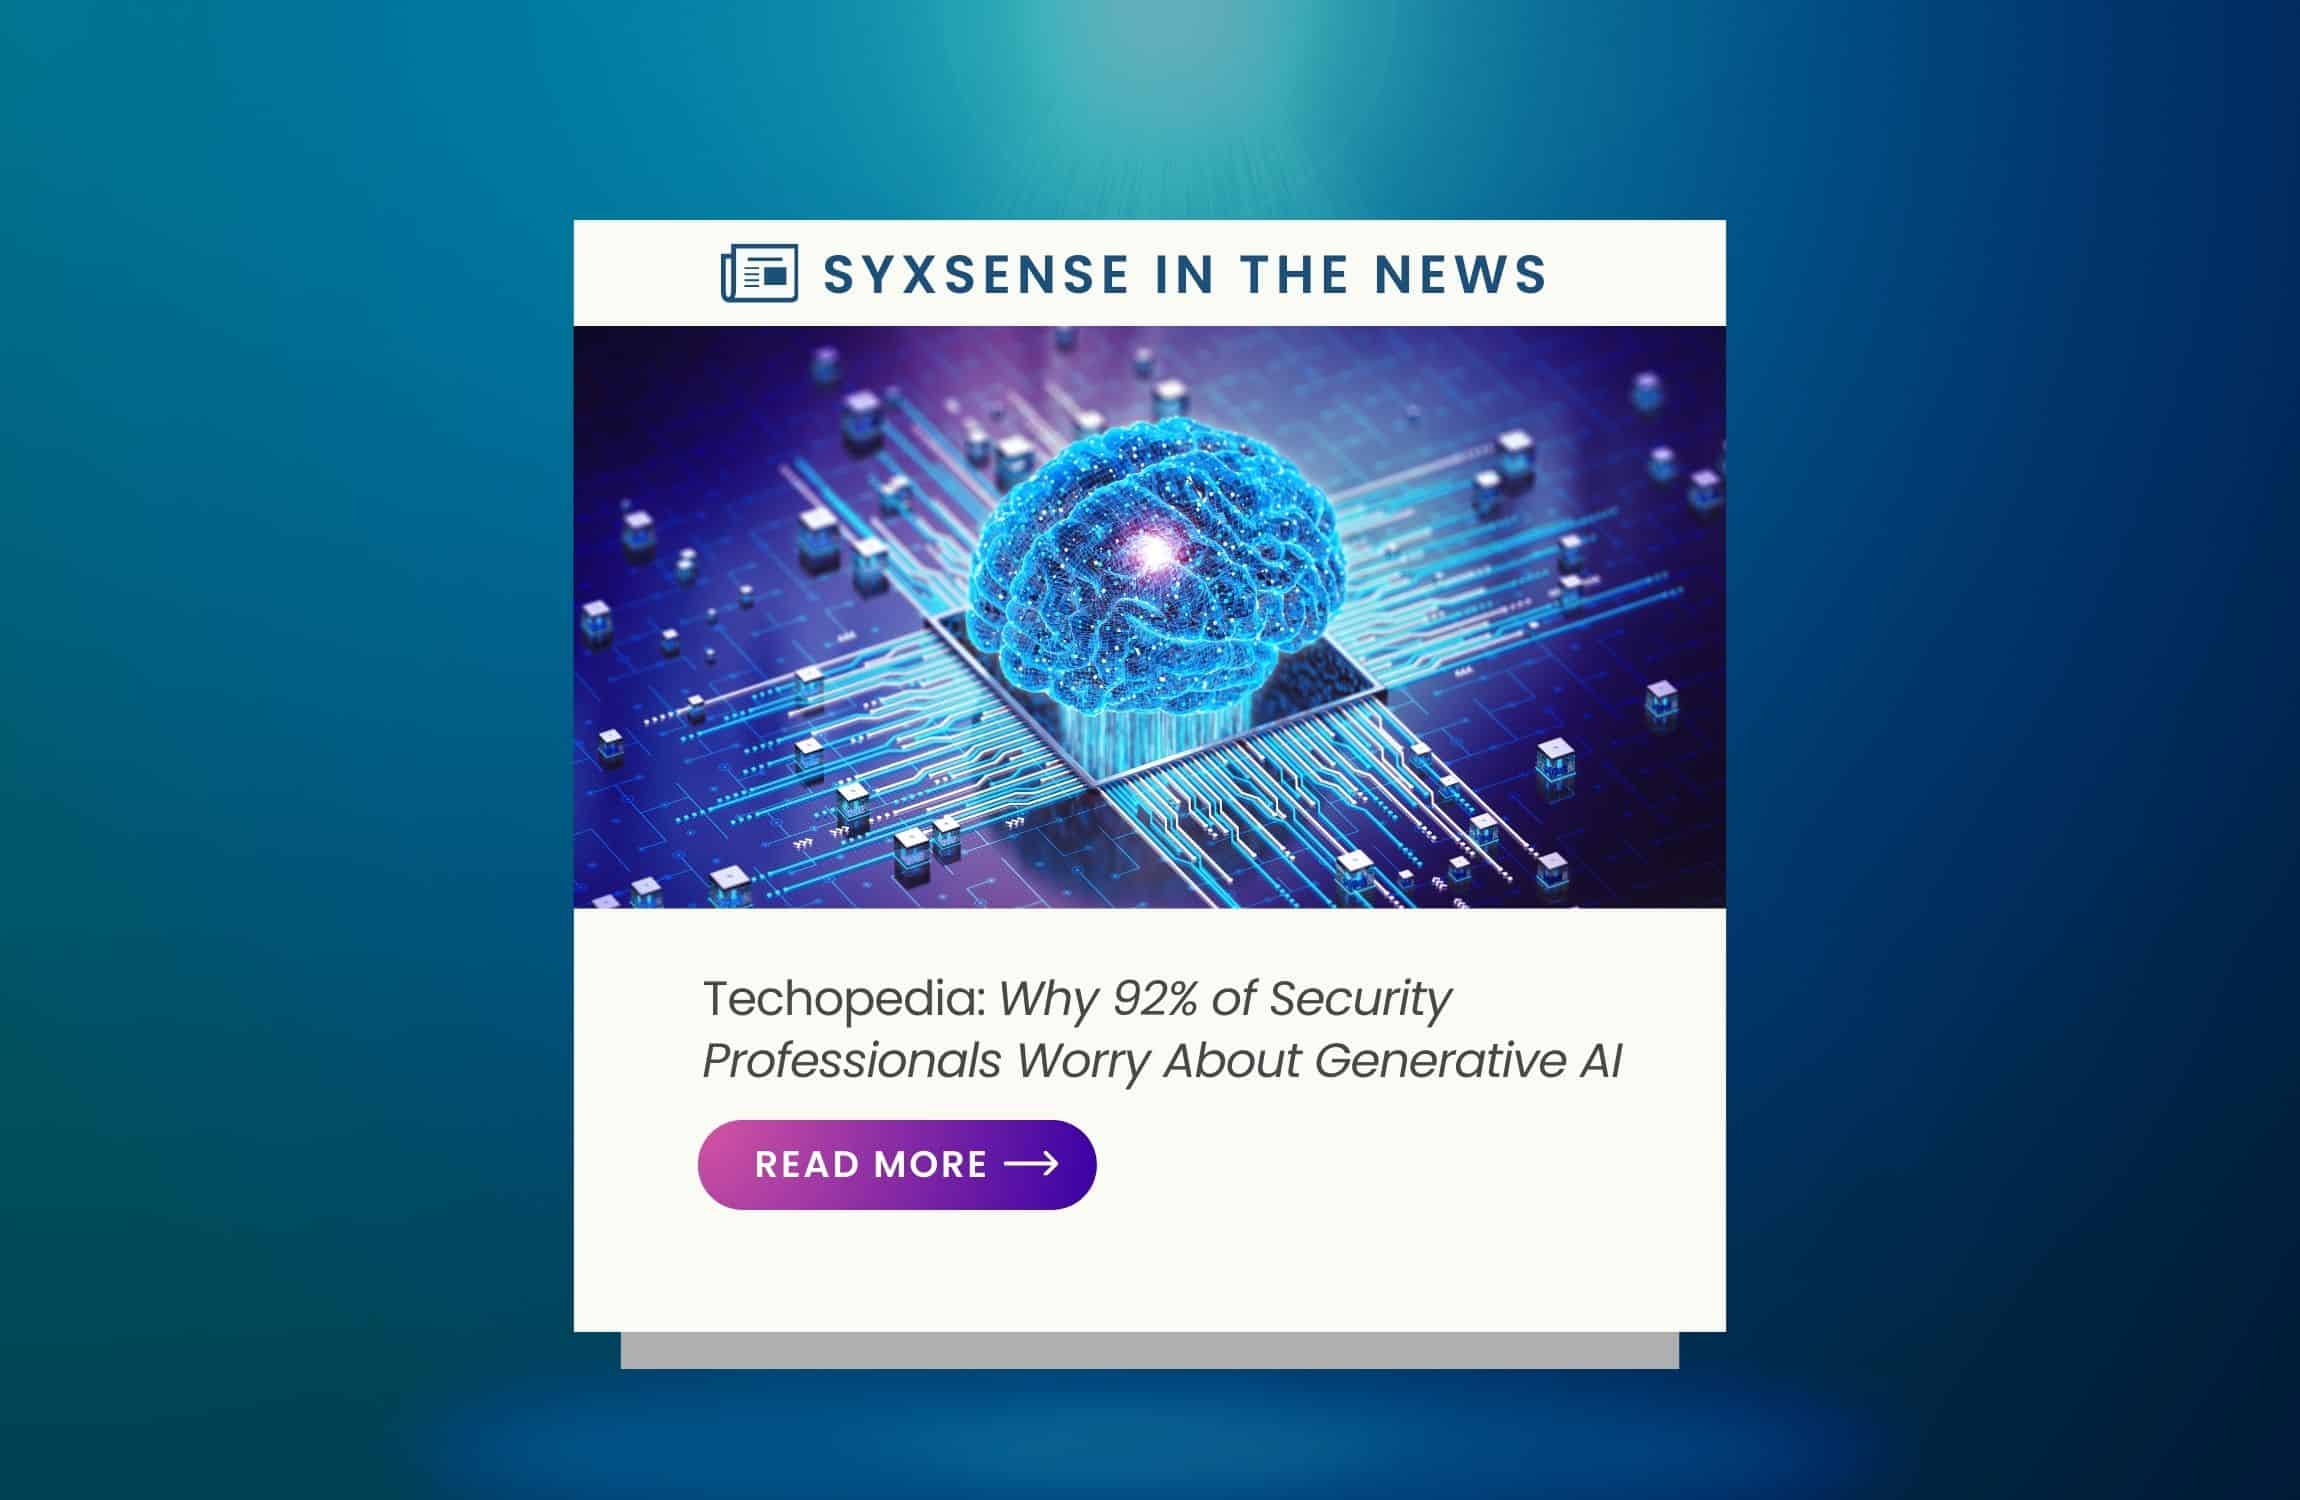 In the News: Why 92% of Security Professionals Worry About Generative AI